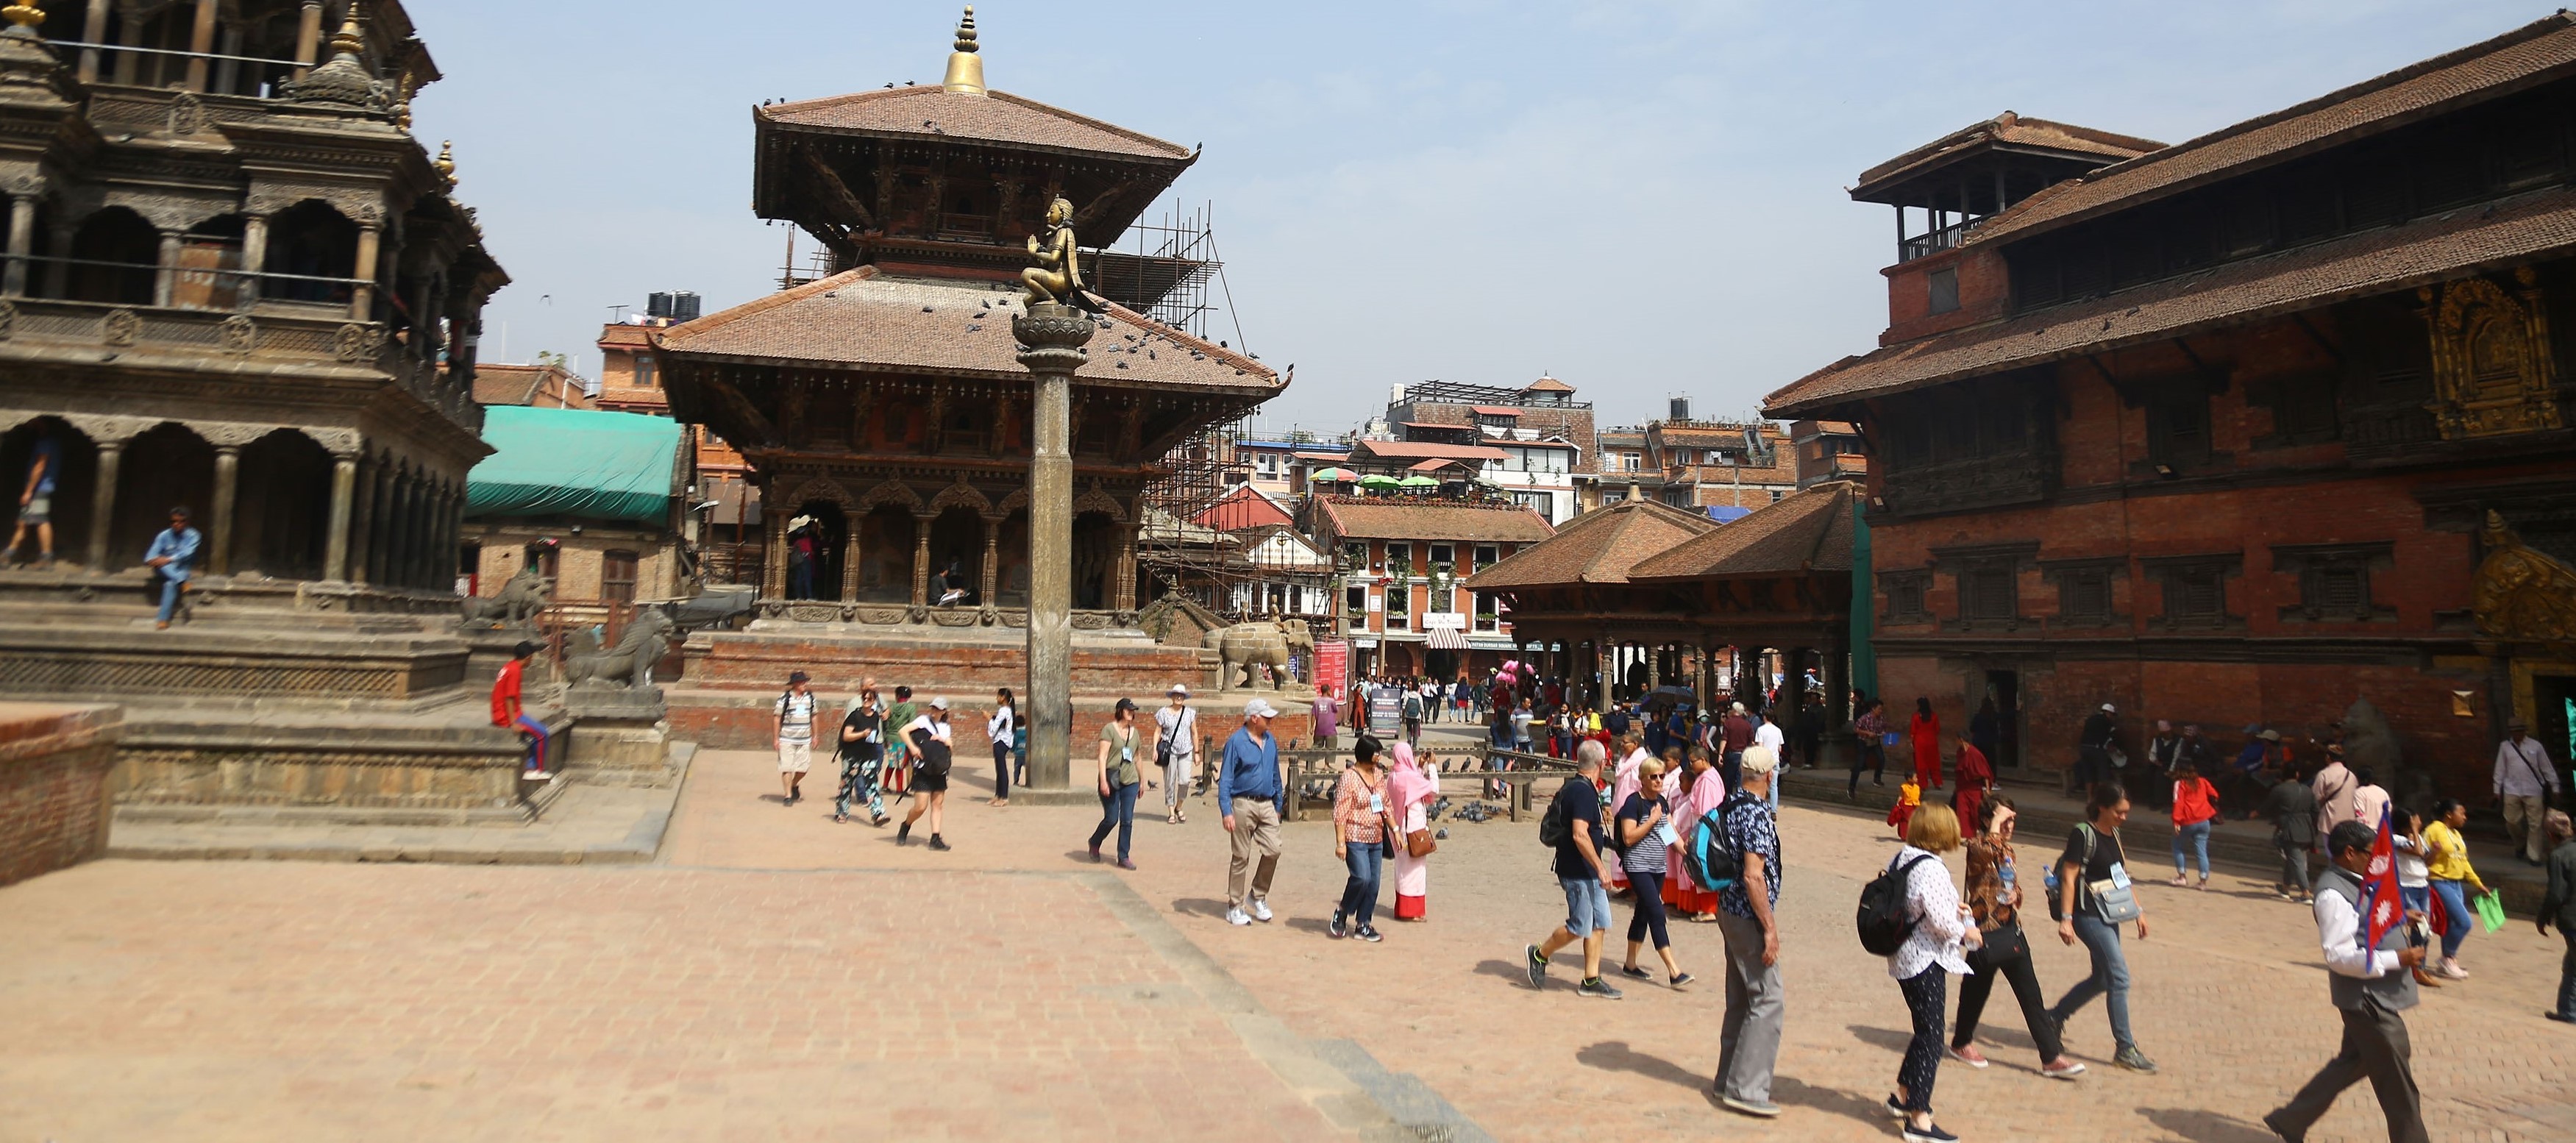 foreign-tourists-at-patan-durbar-area-in-lalitpur